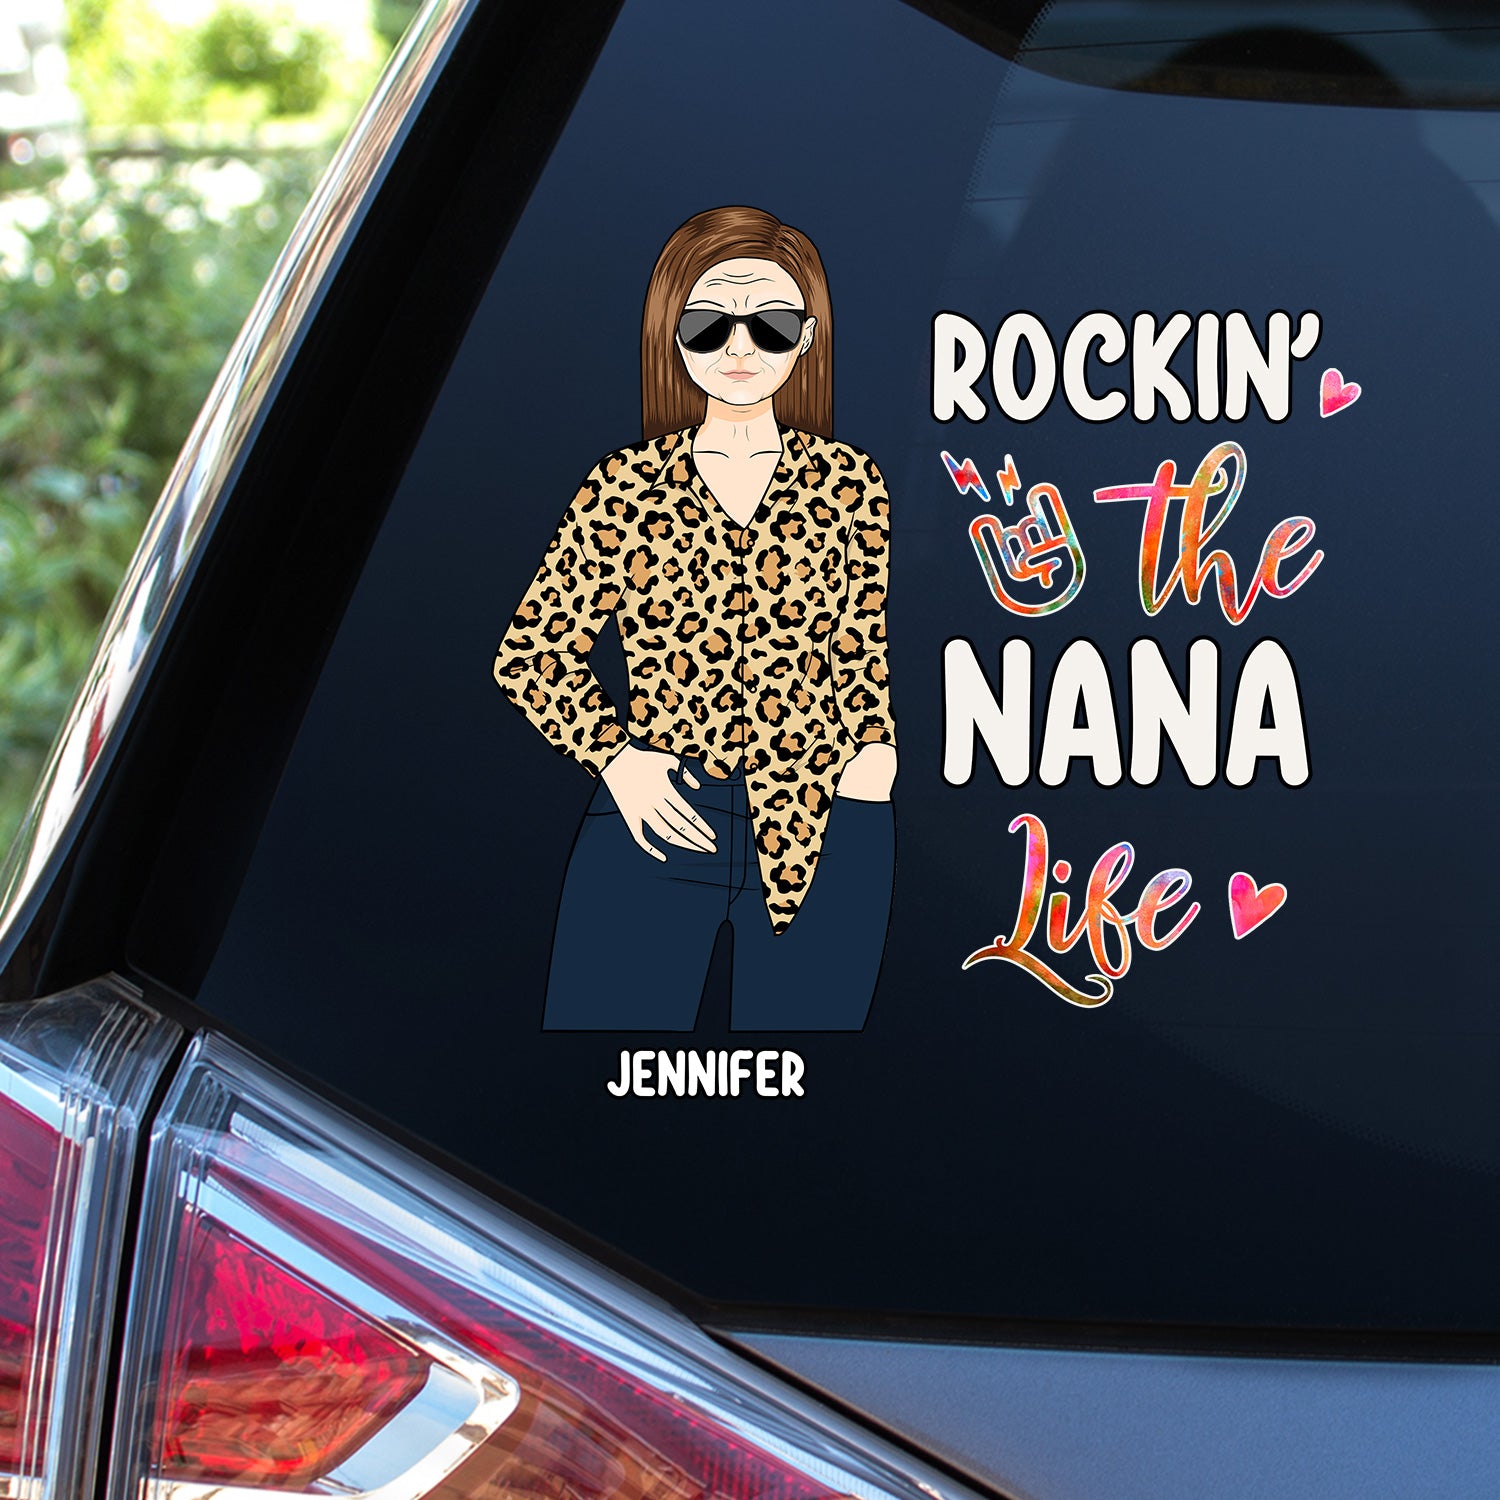 Rocking The Nana Life - Gift For Grandma, Mother, Mom - Personalized Decor Decal